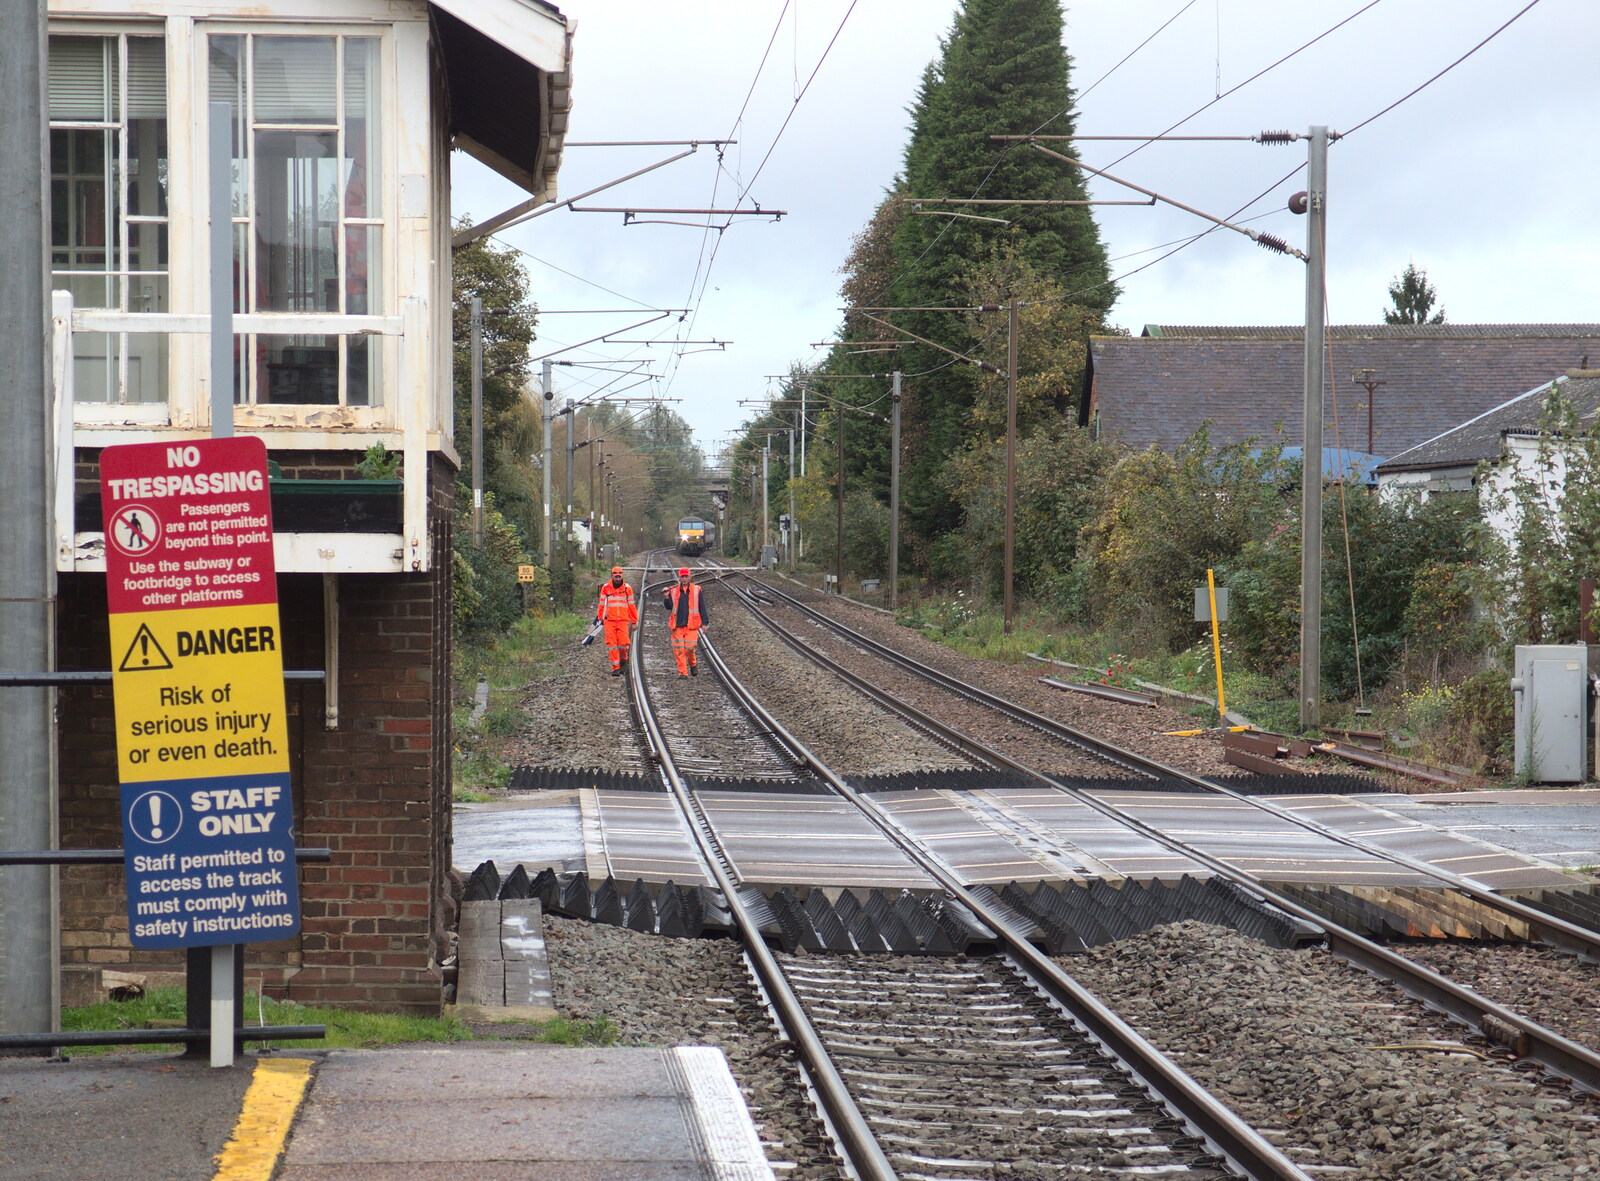 Another delayed train is queued up up the line from (Very) Long Train (Not) Running, Stowmarket, Suffolk - 21st October 2014